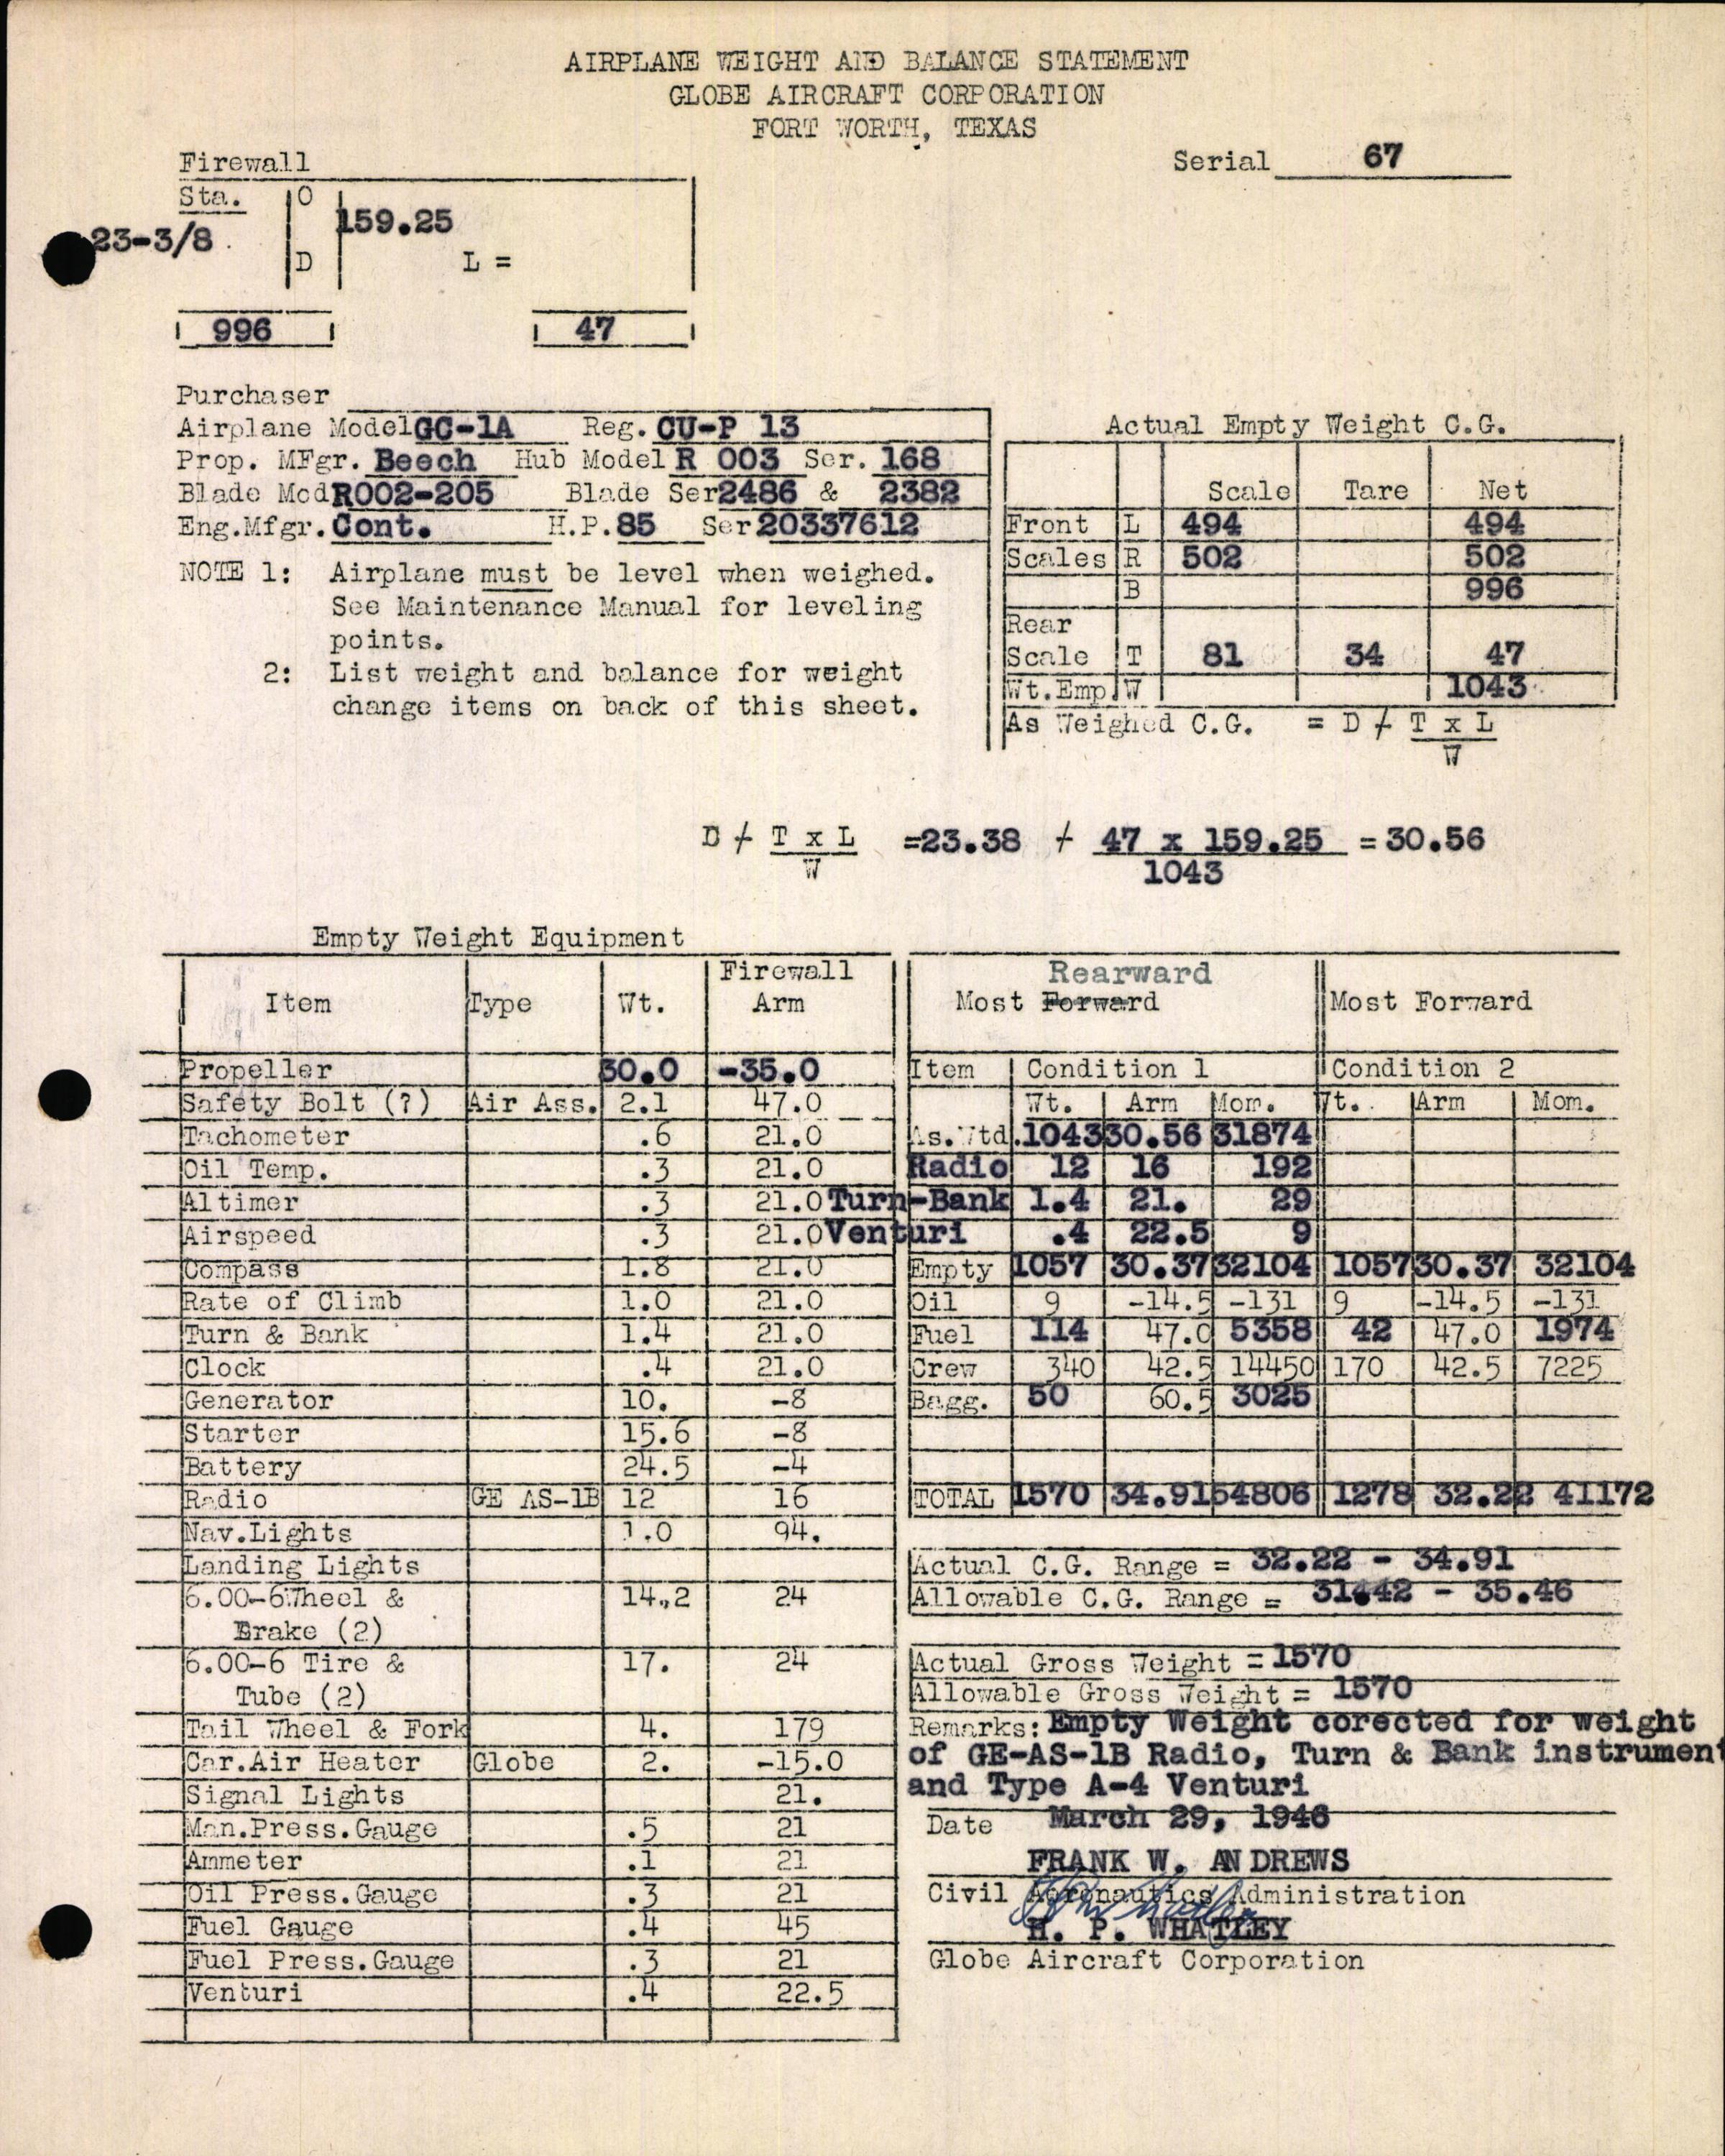 Sample page 5 from AirCorps Library document: Technical Information for Serial Number 67